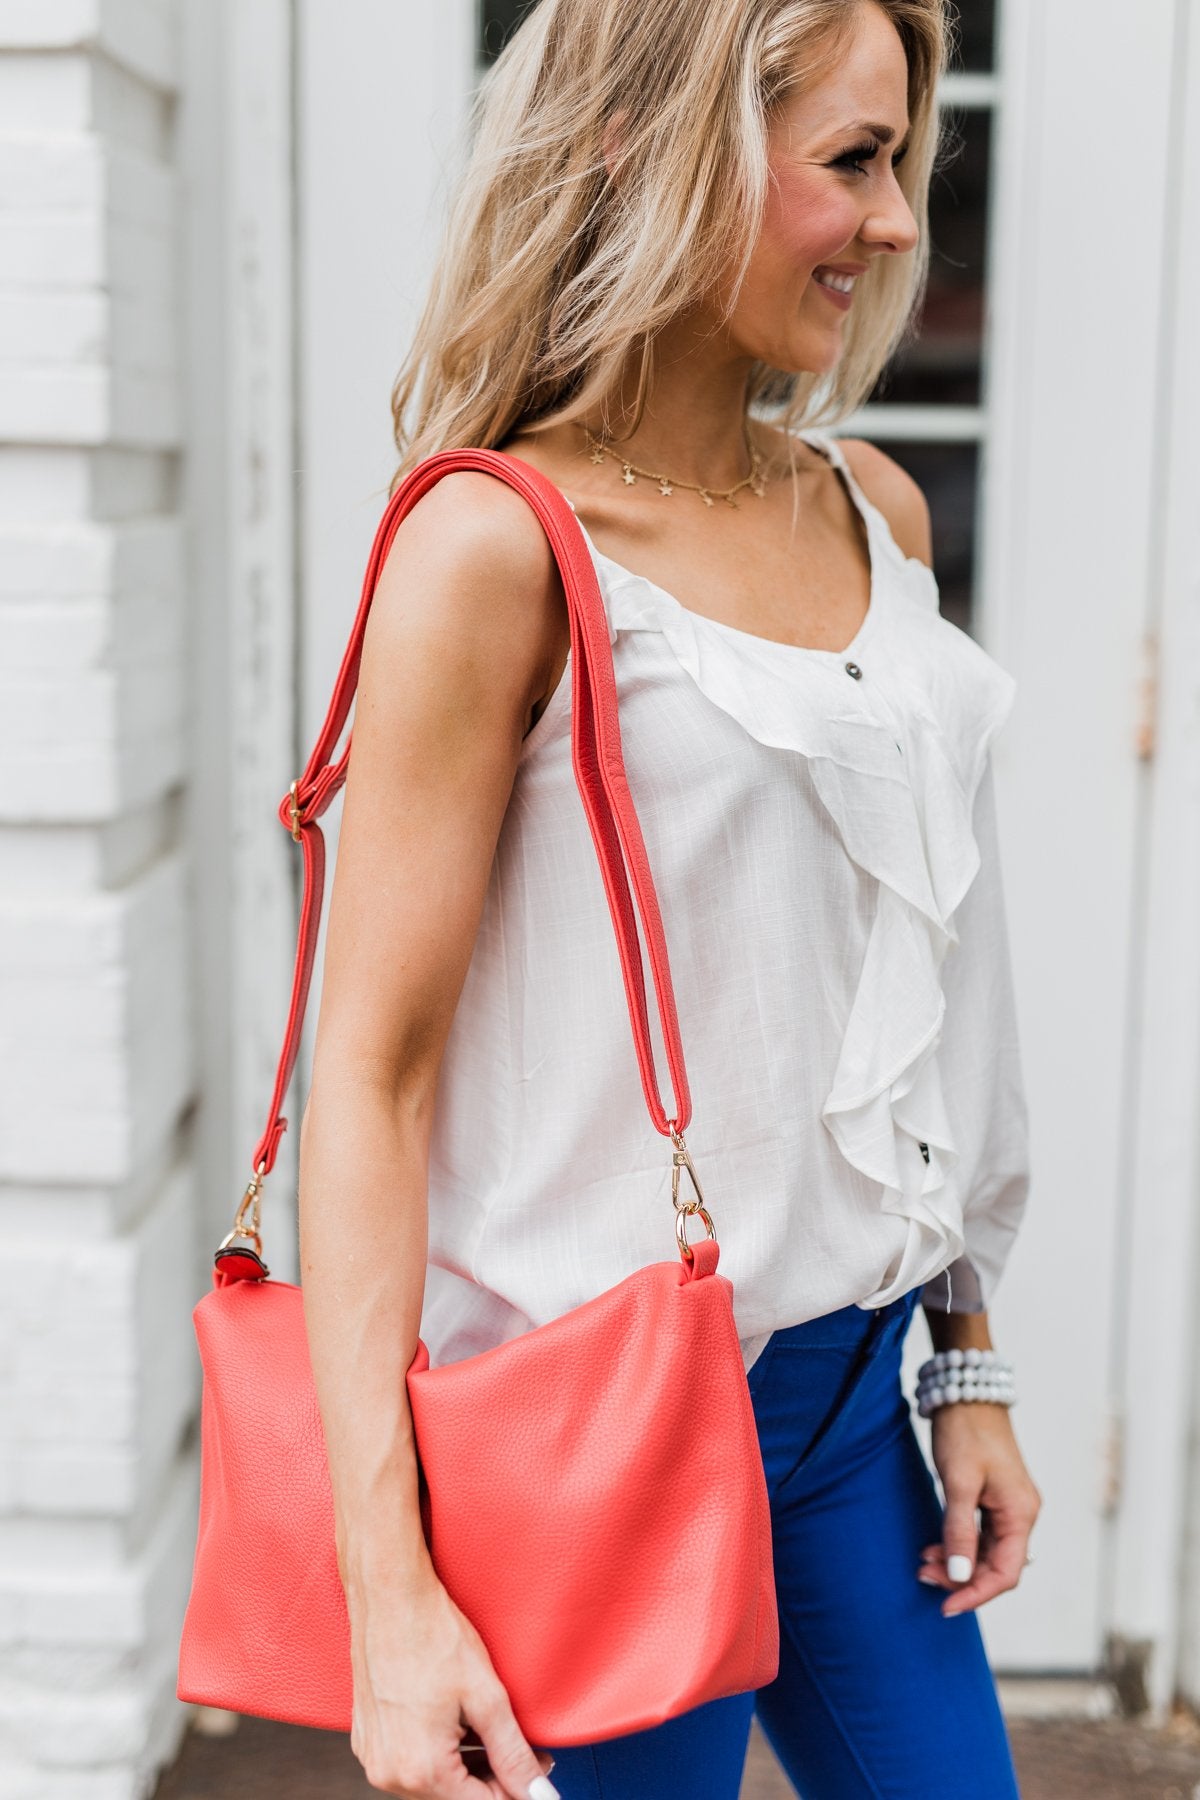 Bring on the Day Zipper Purse- Vibrant Coral